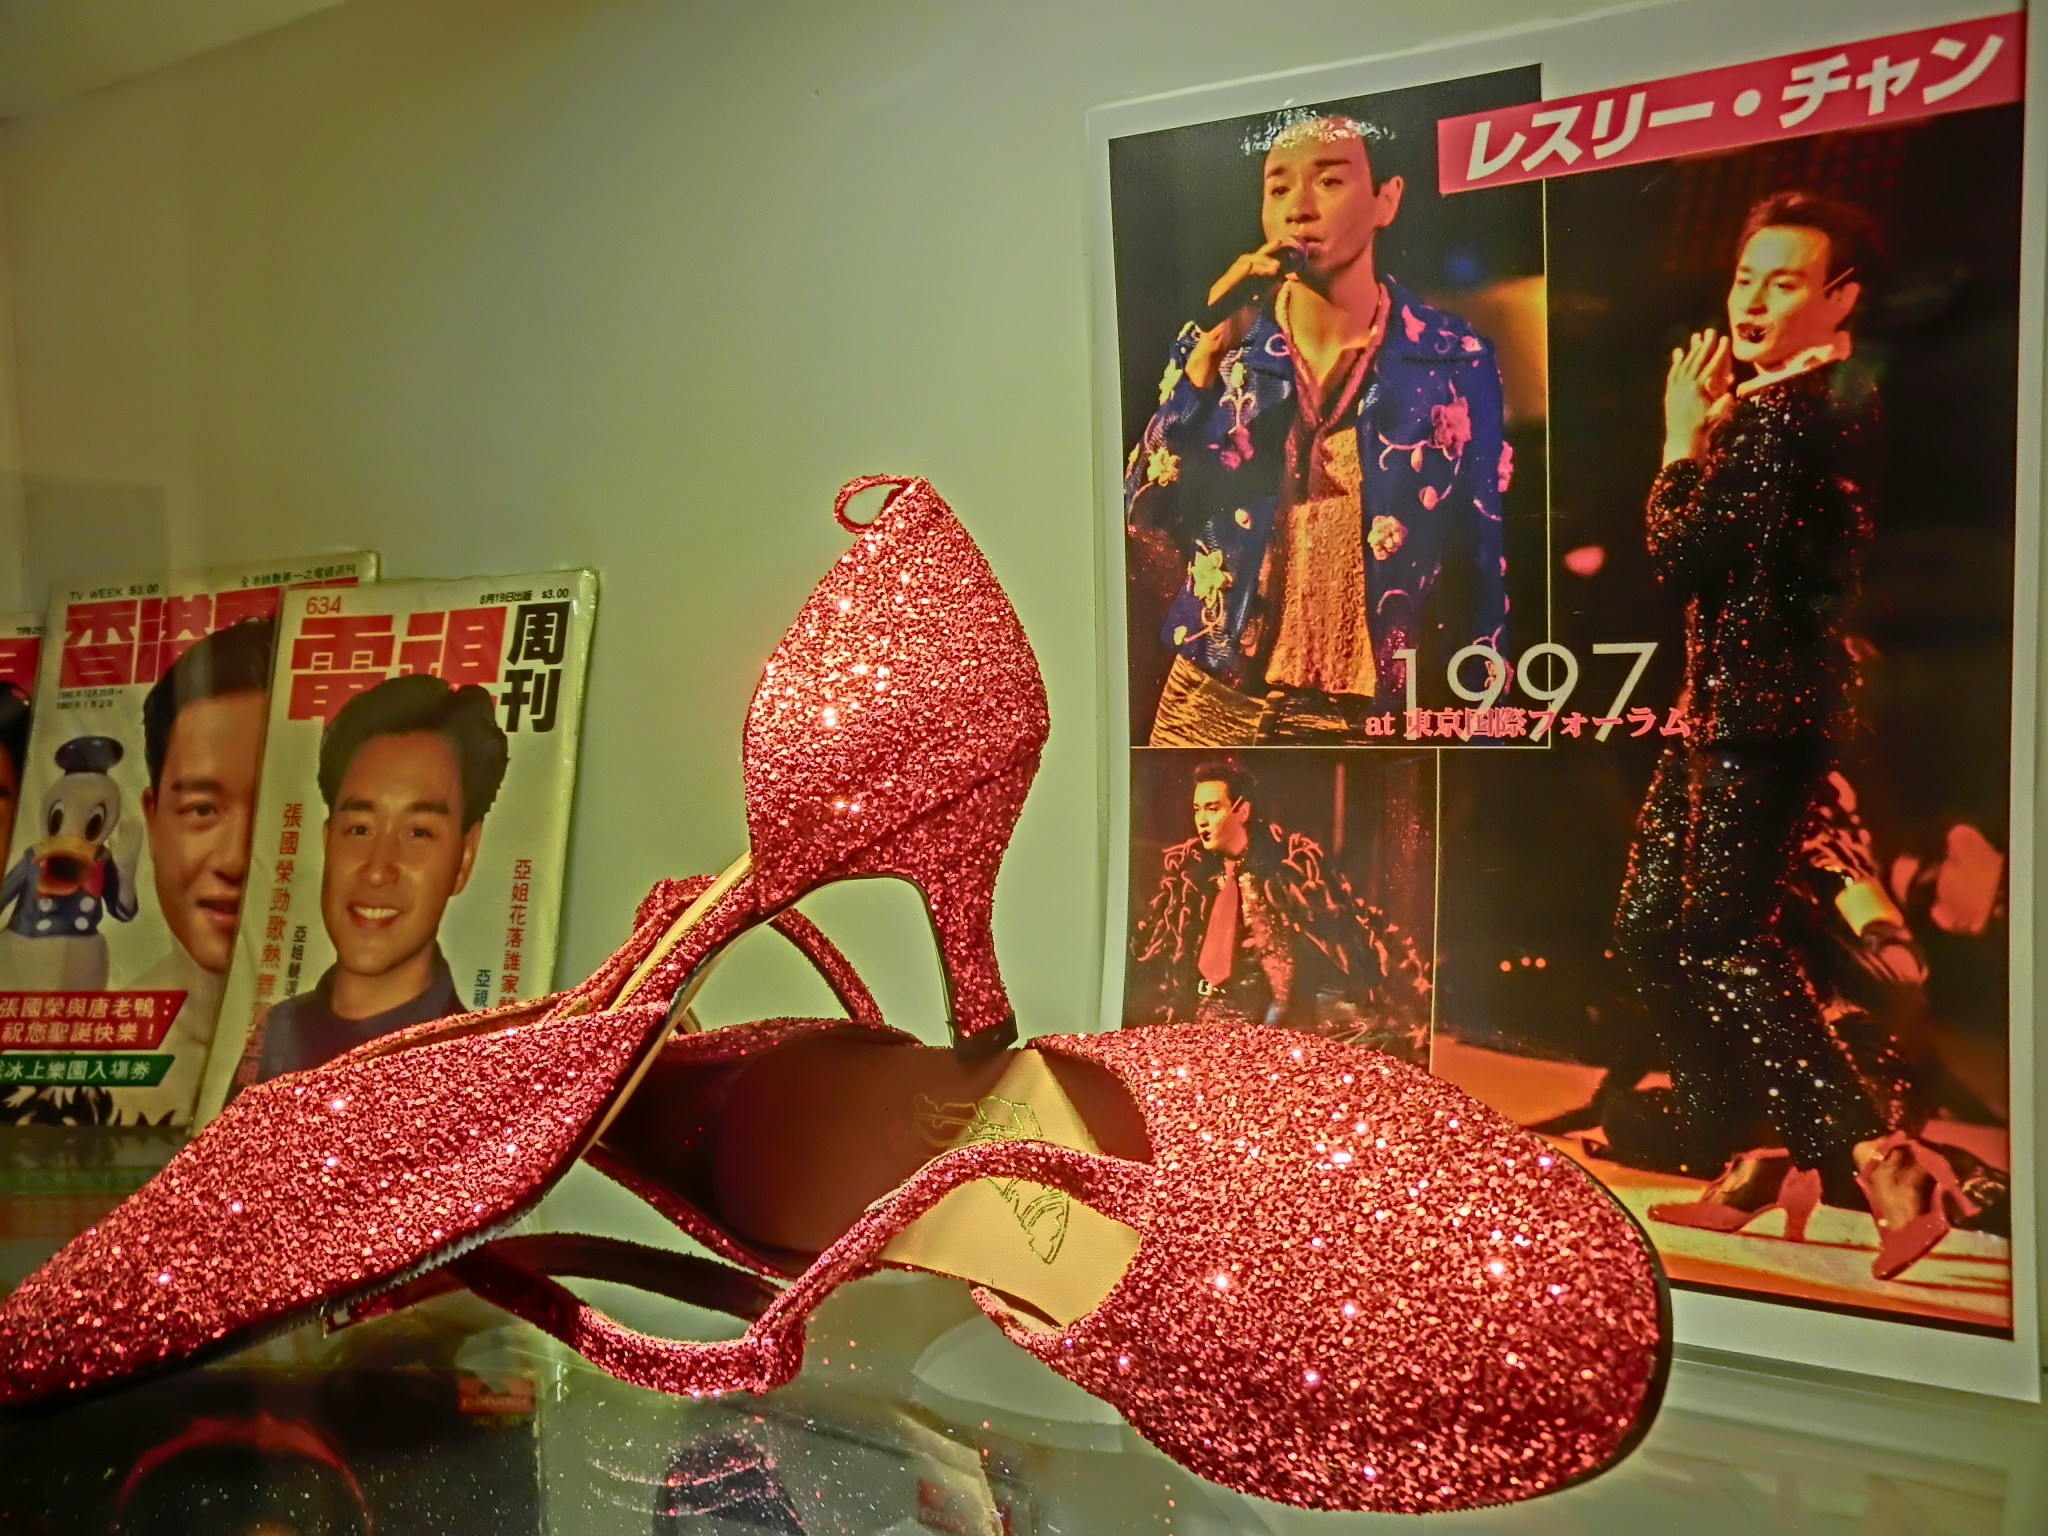 hk_sheung_wan_po_yan_street_shop_art_gallery_para_site_art_space_june-2013_%e9%ab%98%e8%b7%9f%e9%9e%8b_red_high-heeled_shoes_leslie_cheung_picture